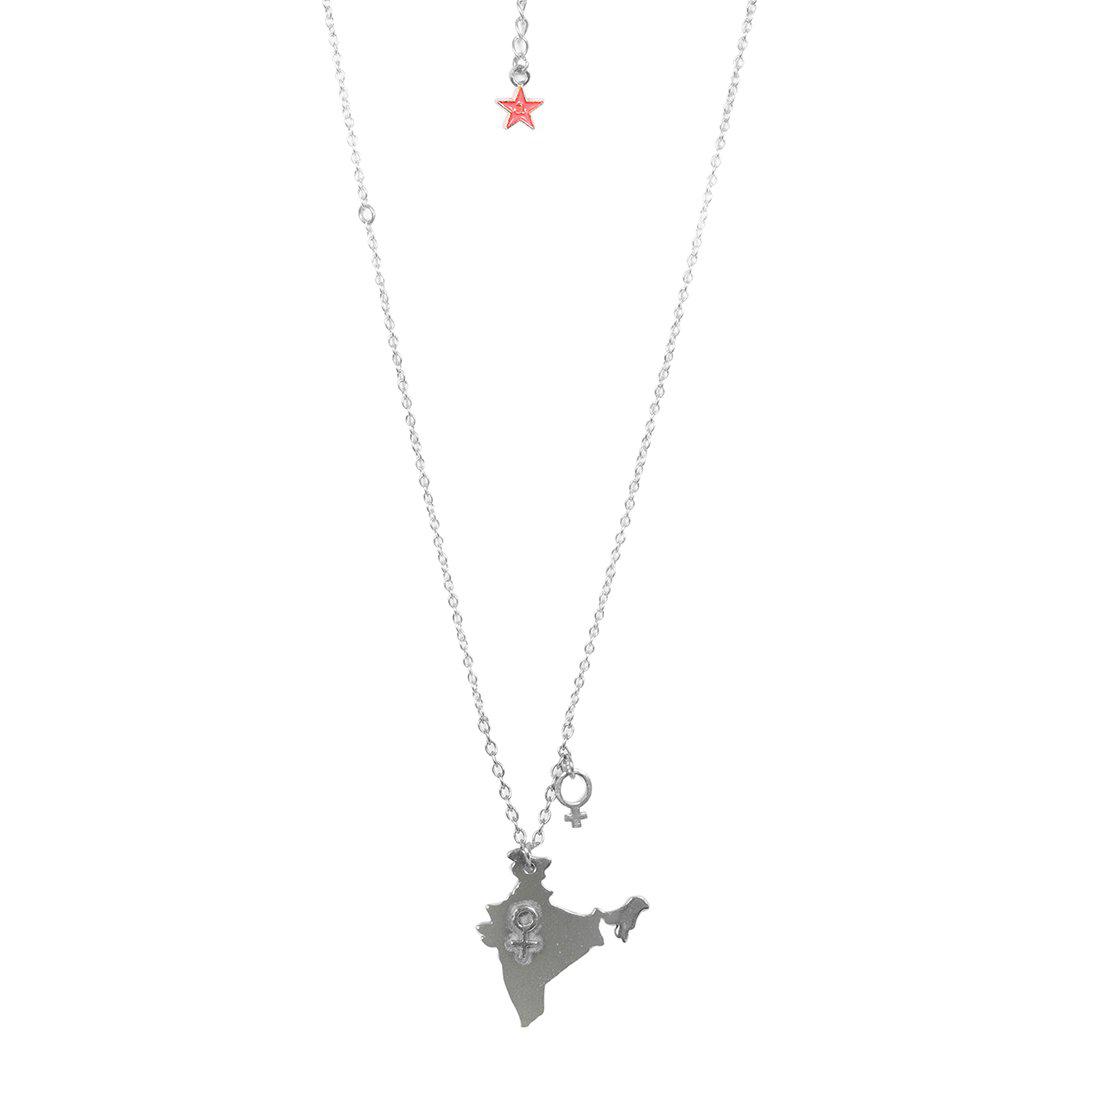 INDIA MAP CHAIN NECKLACE WITH GIRL CHARM